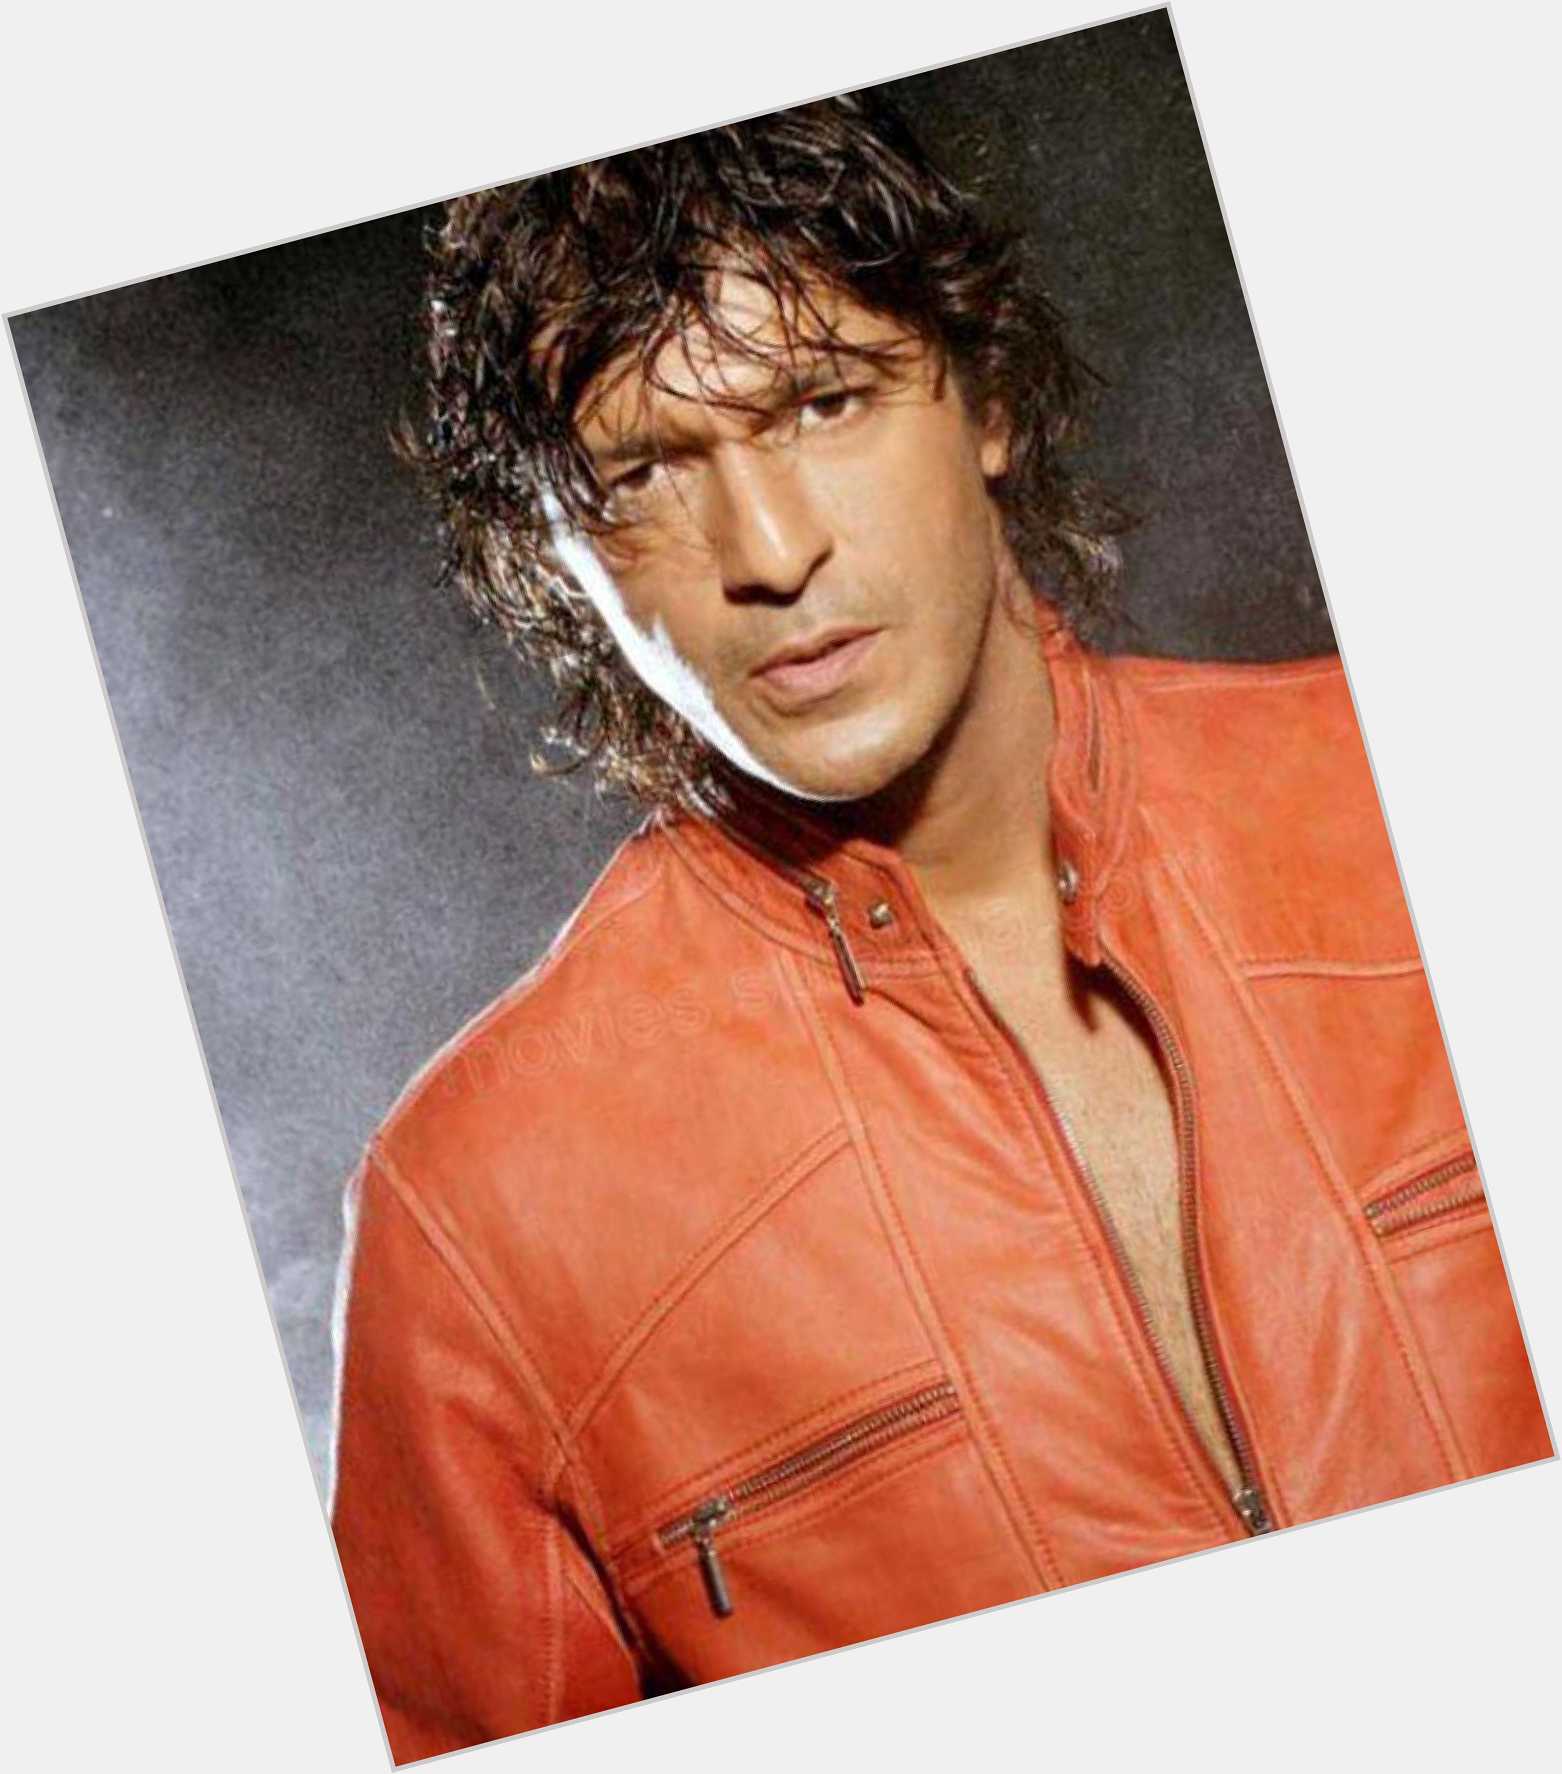 Chunky Pandey hairstyle 3